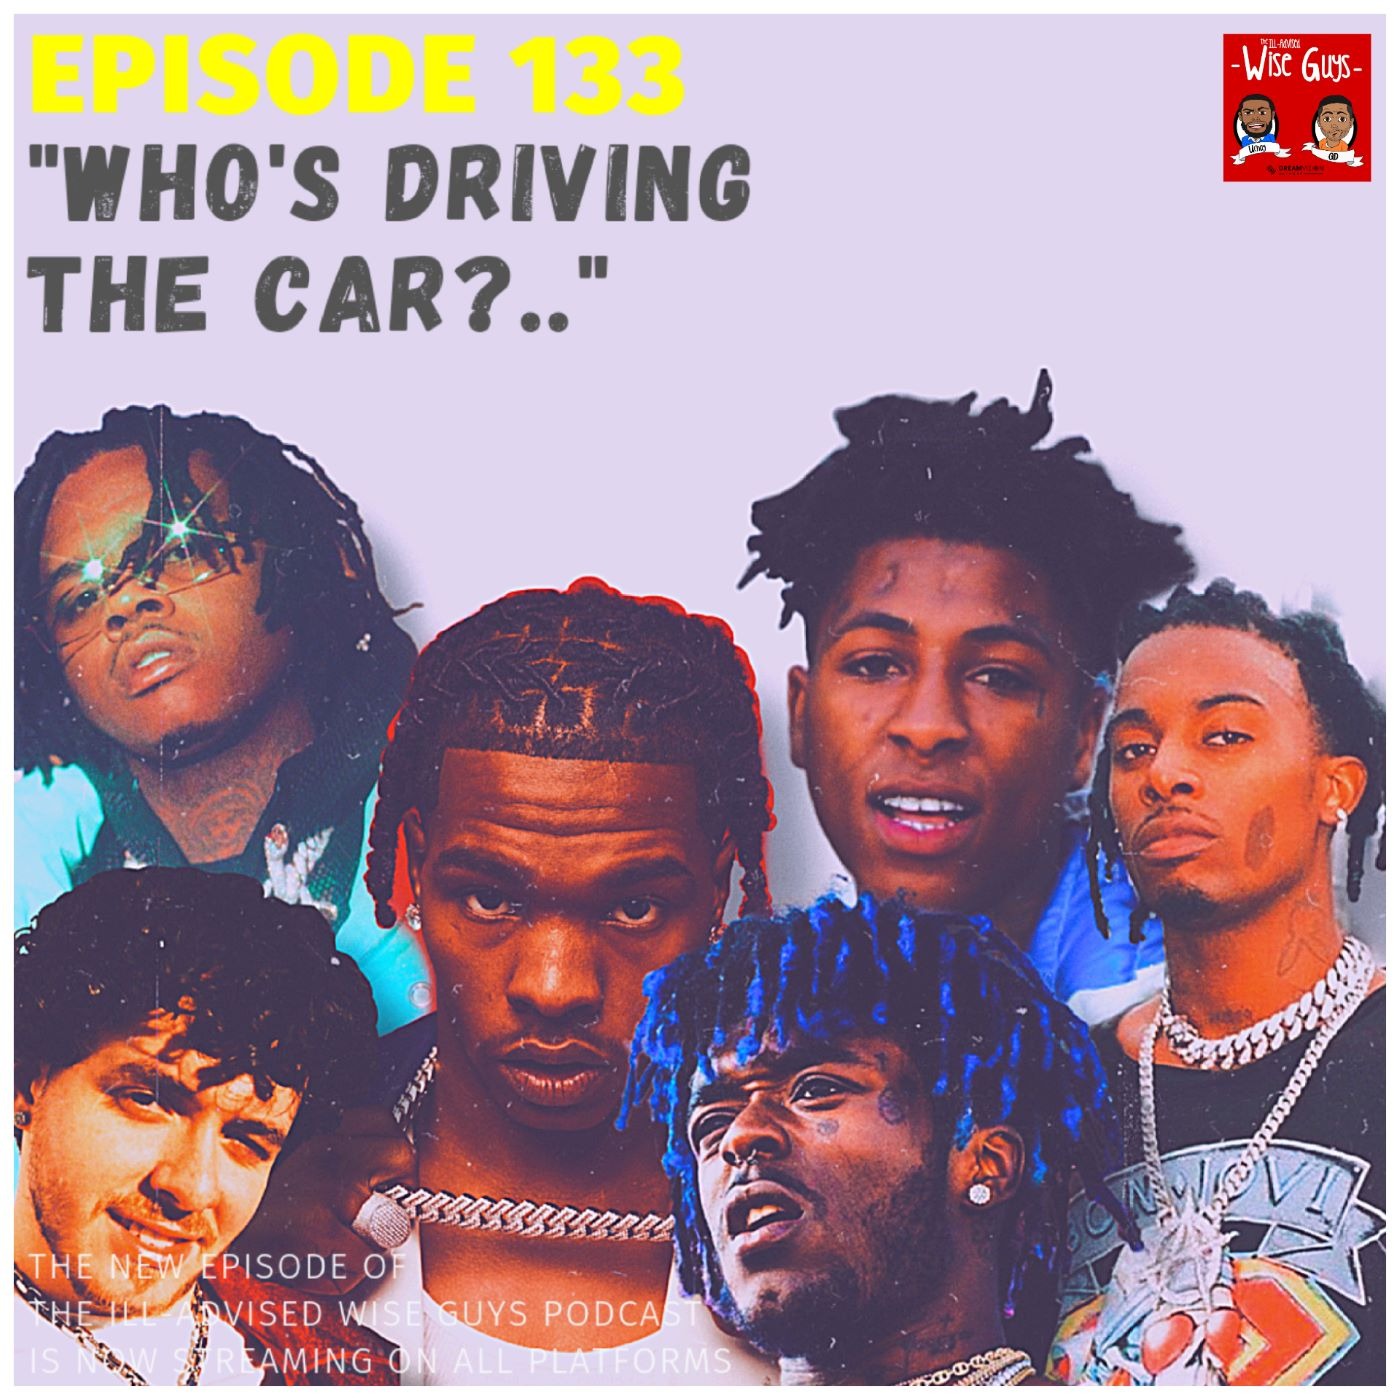 Episode 133 - "Who's Driving The Car?..."